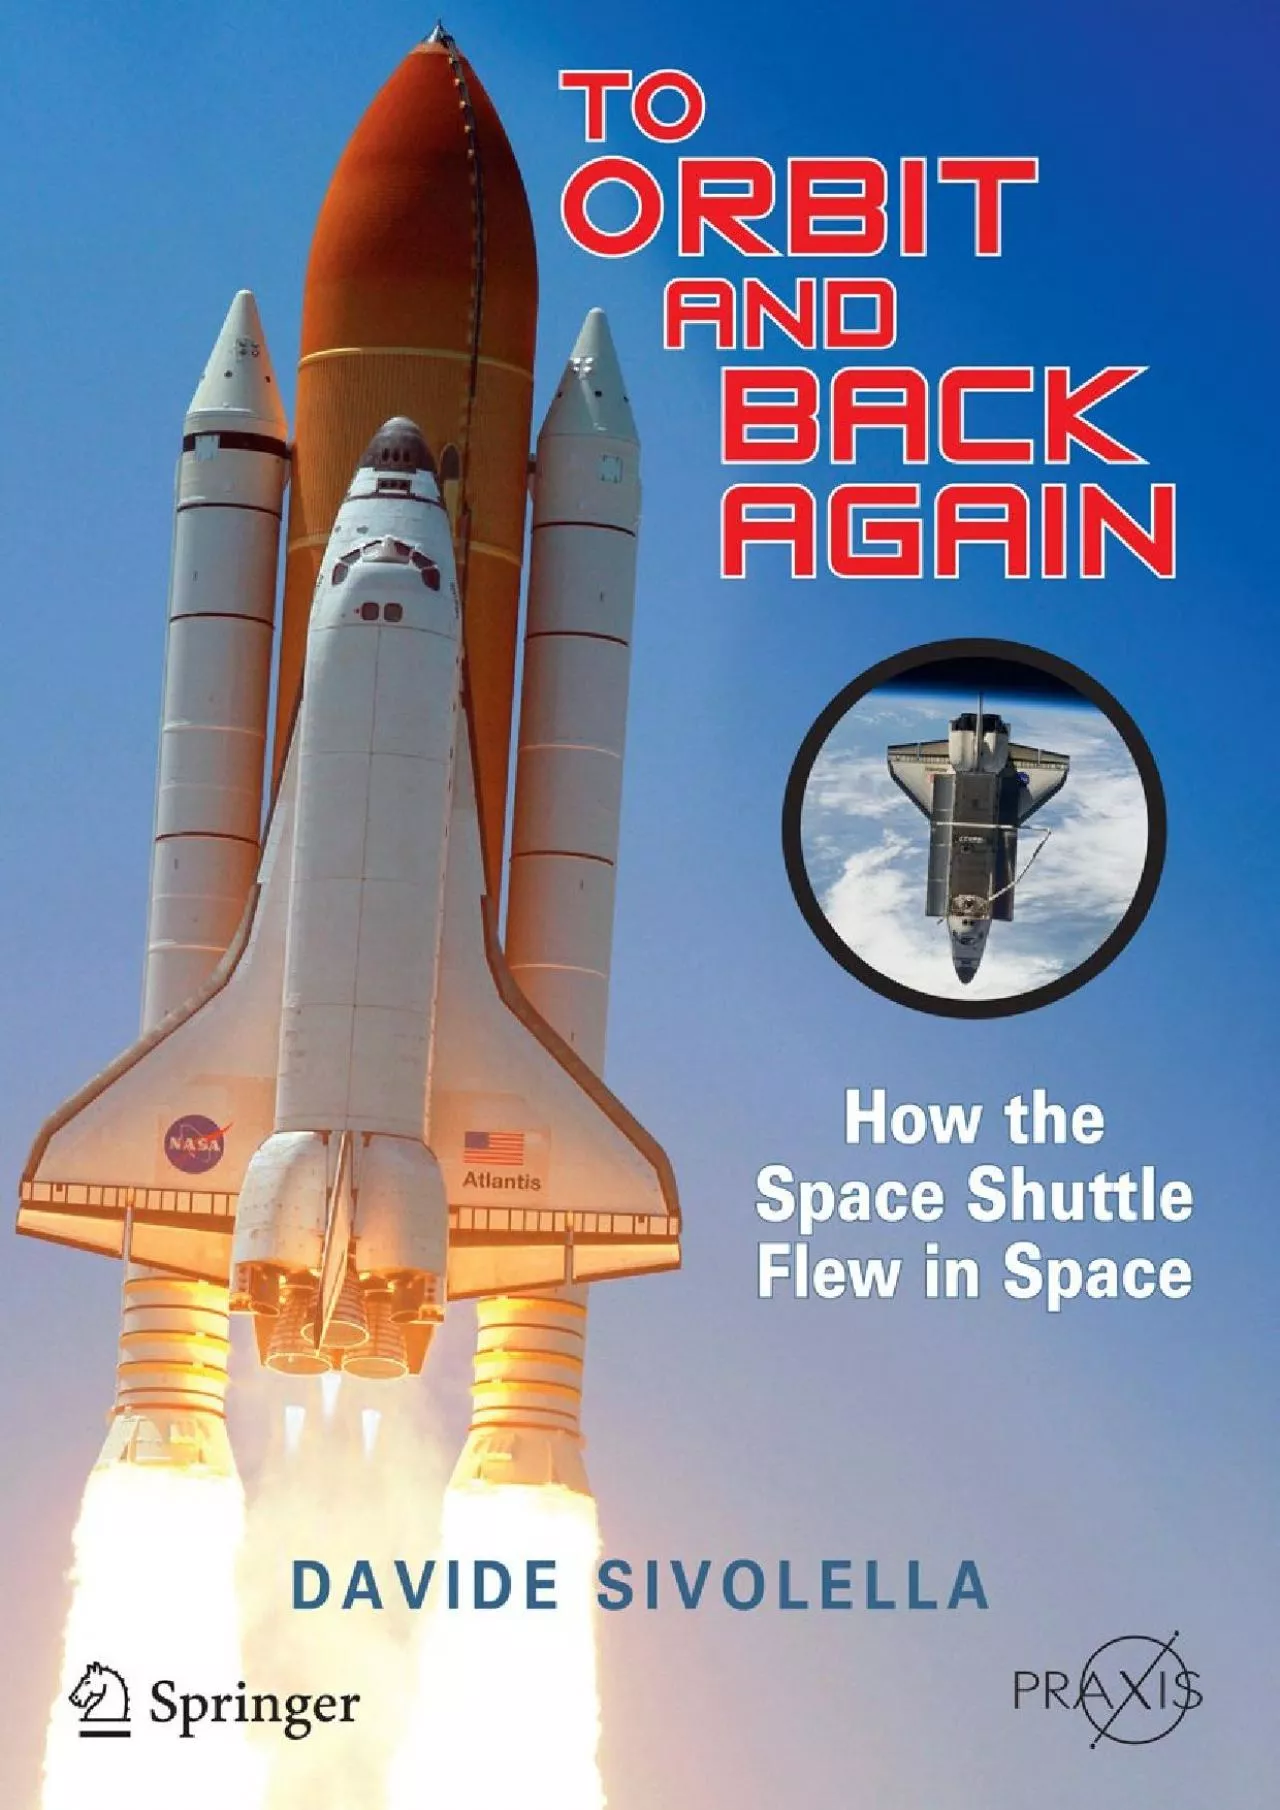 (EBOOK)-To Orbit and Back Again: How the Space Shuttle Flew in Space (Springer Praxis